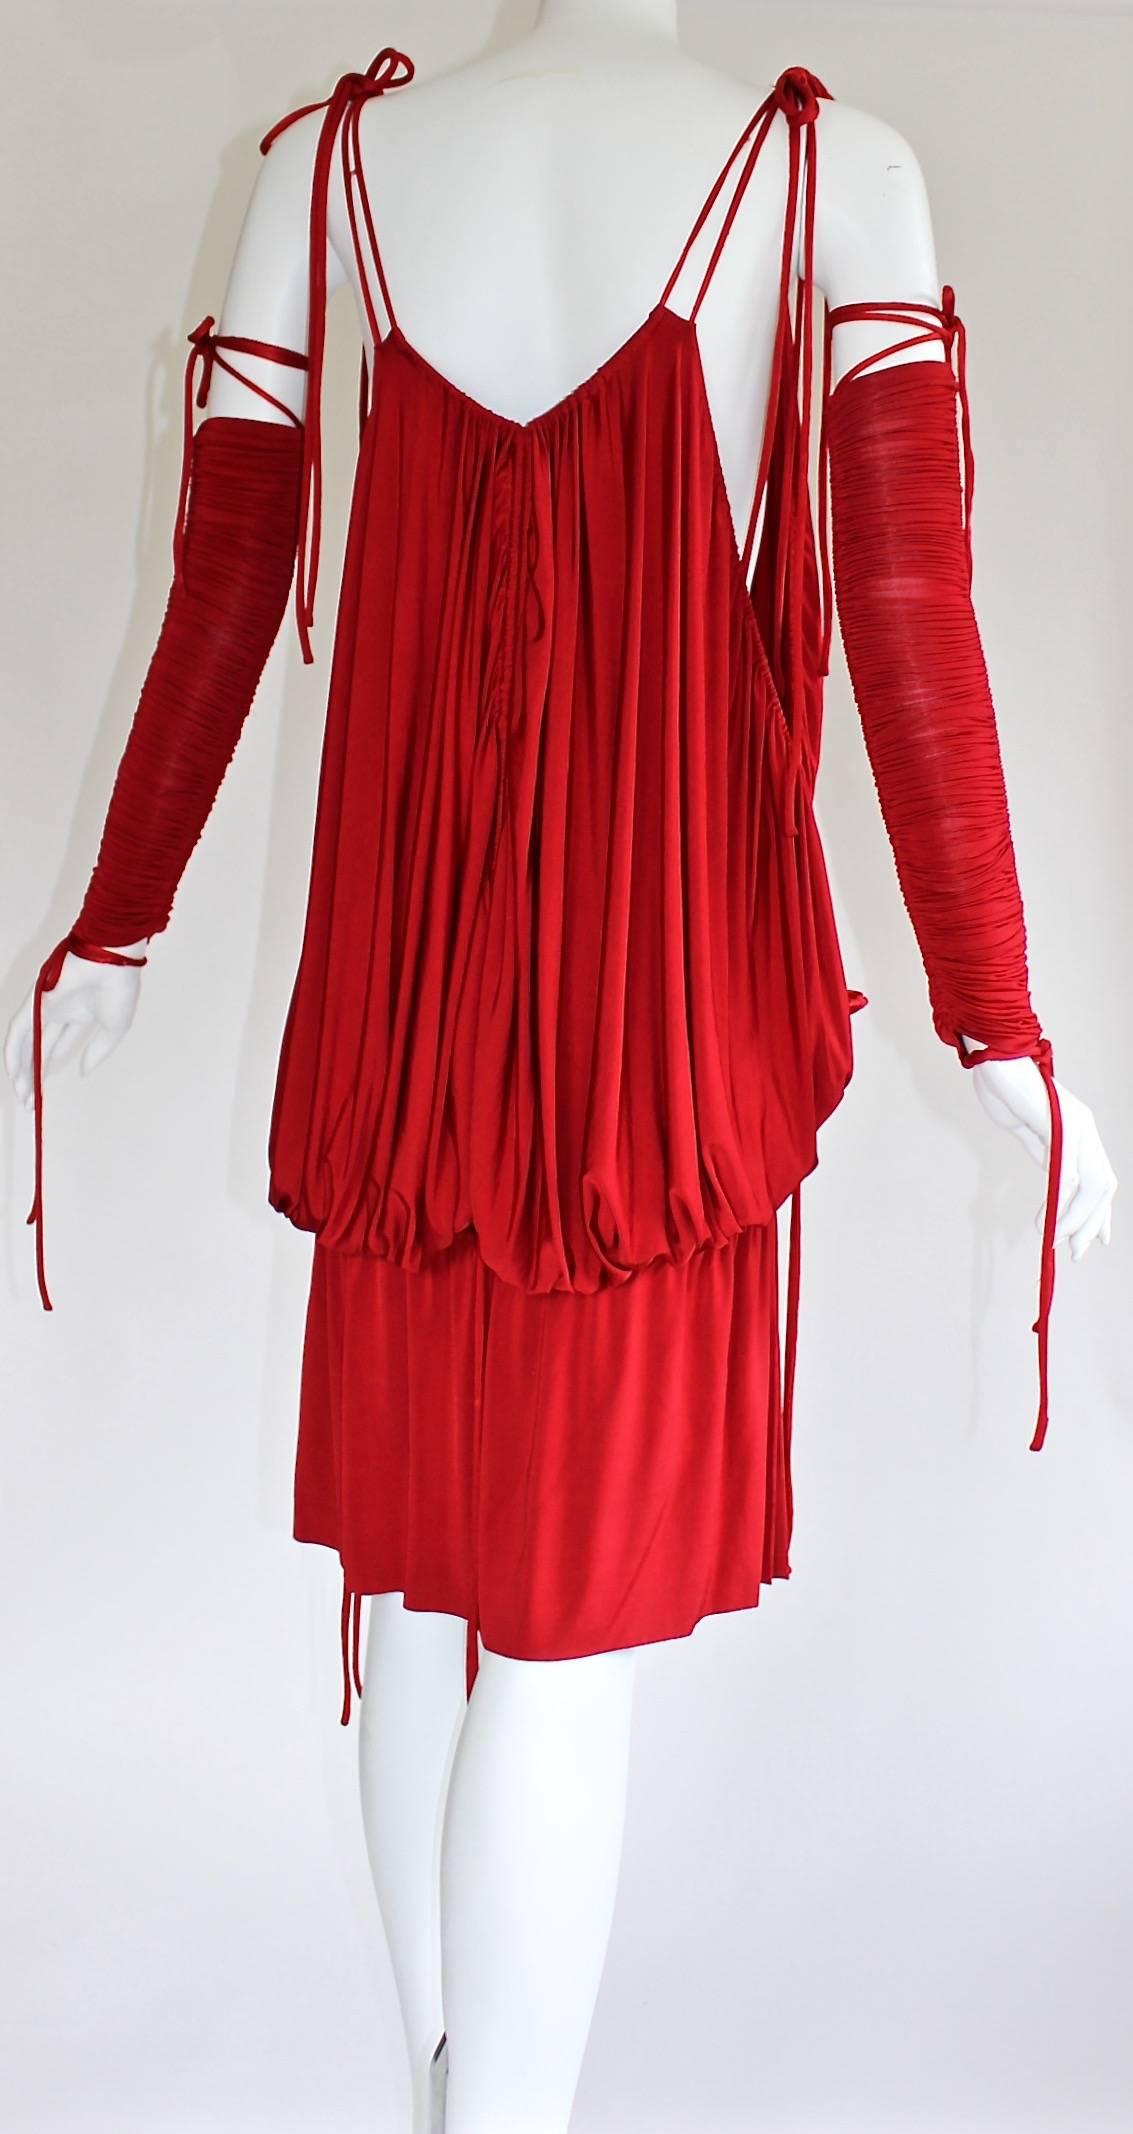  Dolce & Gabbana Runway Ad Campaign Red Mini Dress Ruched Arm Bands, 2003 In Excellent Condition For Sale In Boca Raton, FL